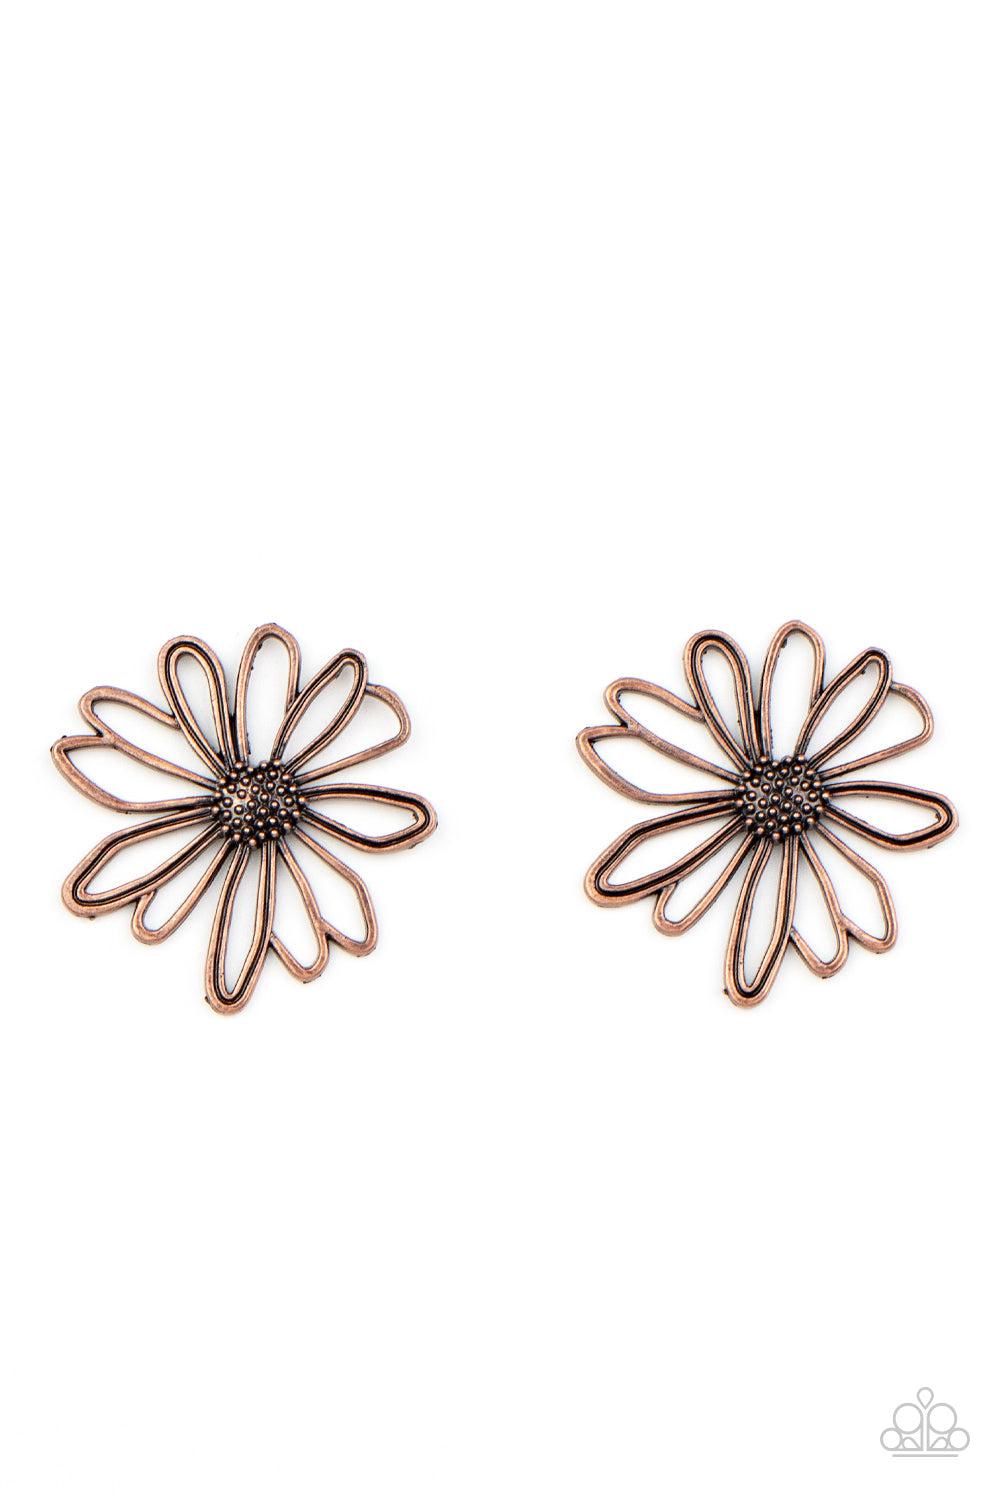 Artisan Arbor Copper Flower Earrings - Paparazzi Accessories- lightbox - CarasShop.com - $5 Jewelry by Cara Jewels